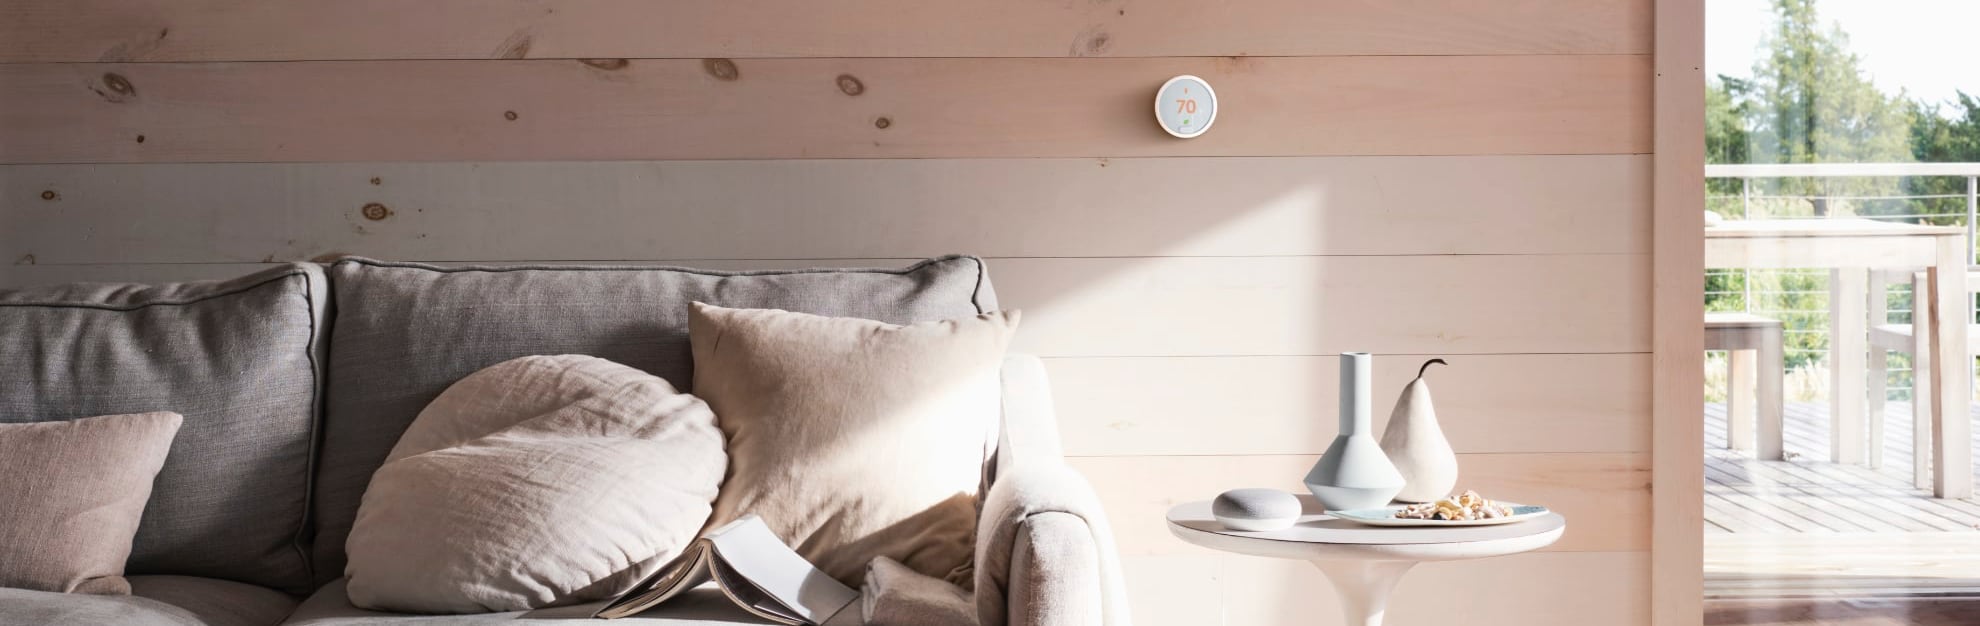 Vivint Home Automation in Fort Wayne